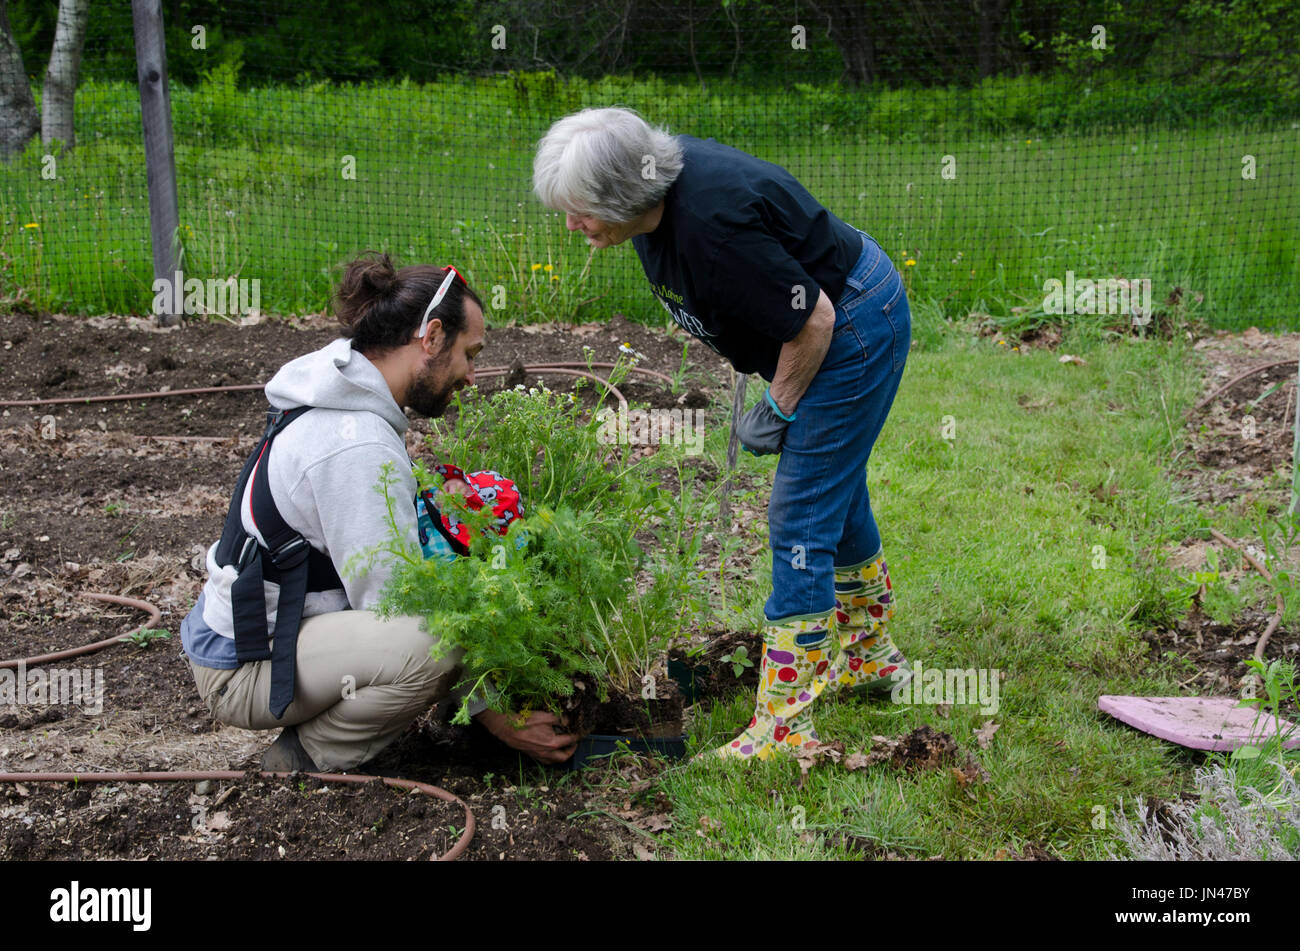 Two gardeners in Community garden planting - new father of infant and older woman work together, Maine, USA Stock Photo